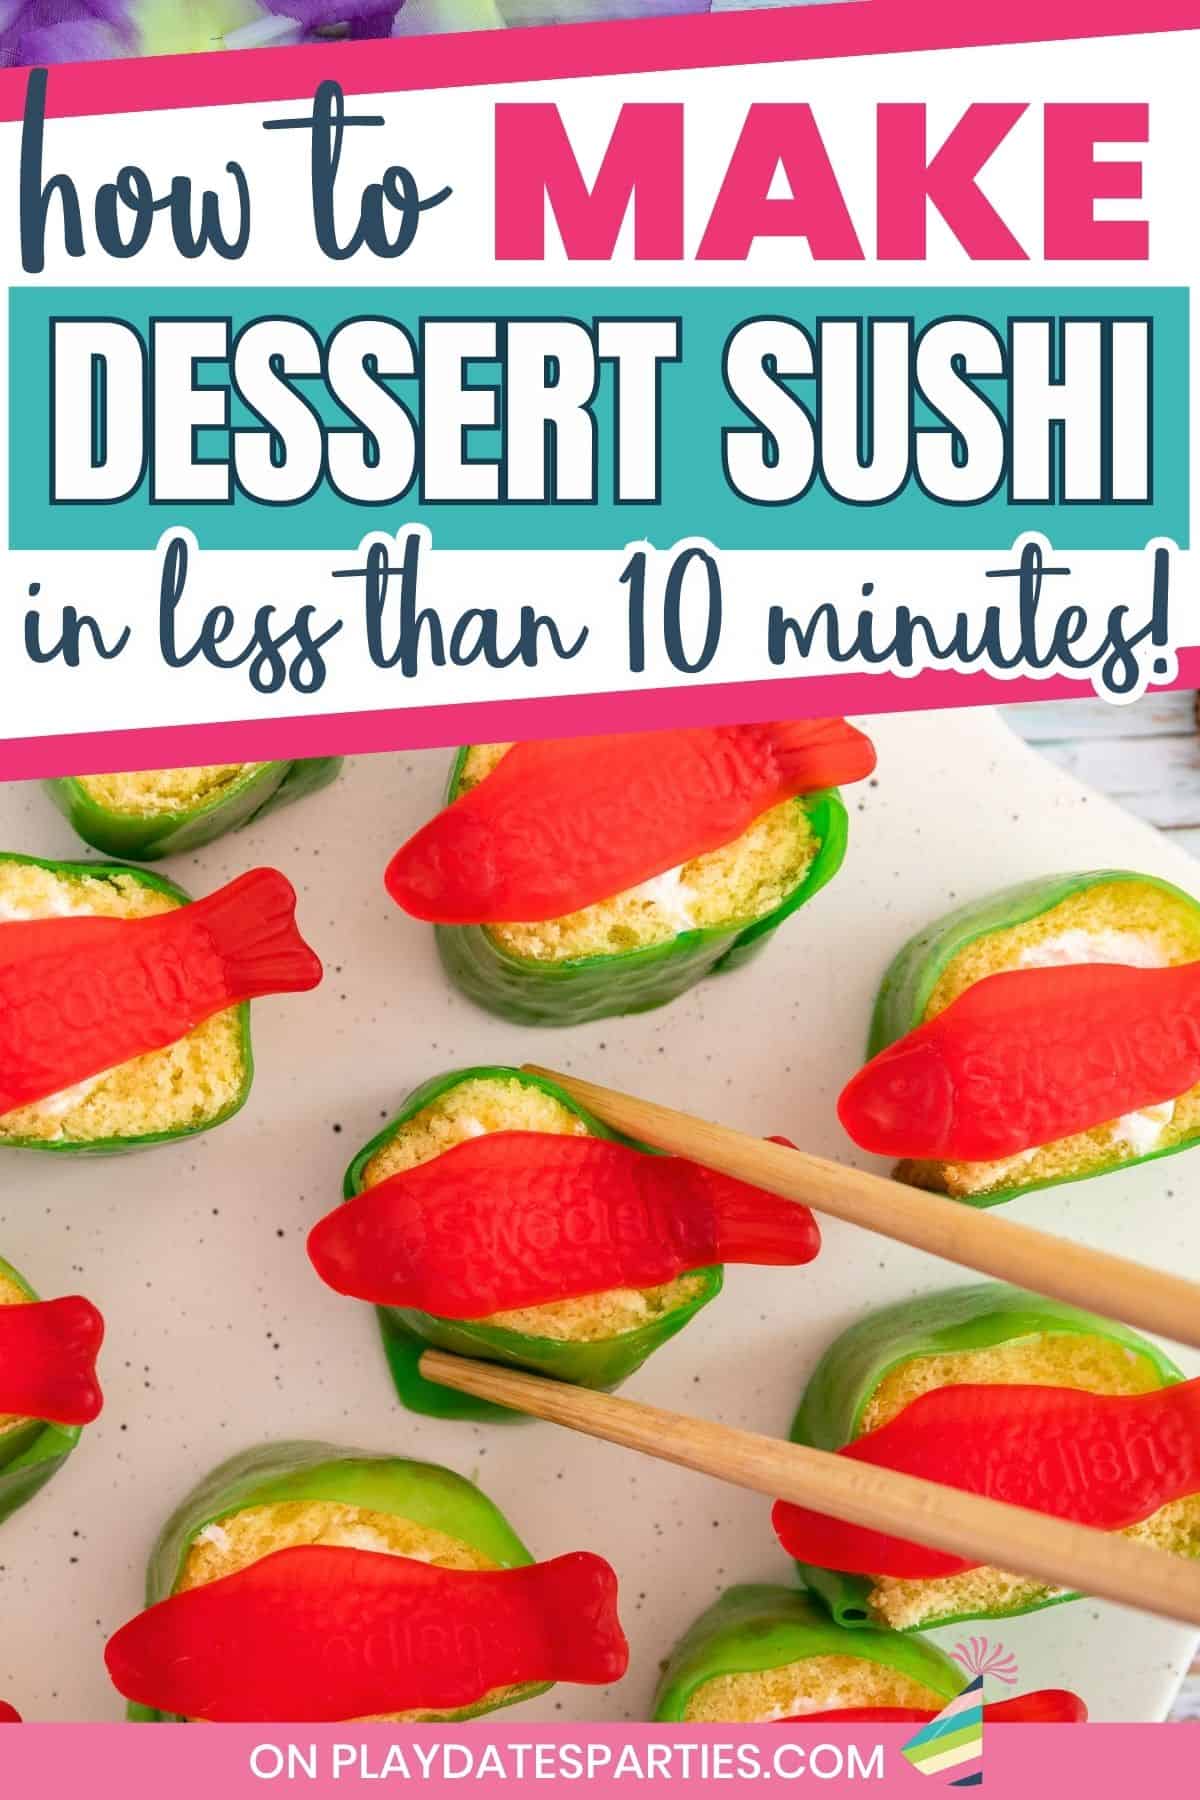 How to Make Dessert Sushi in less than 10 minutes.